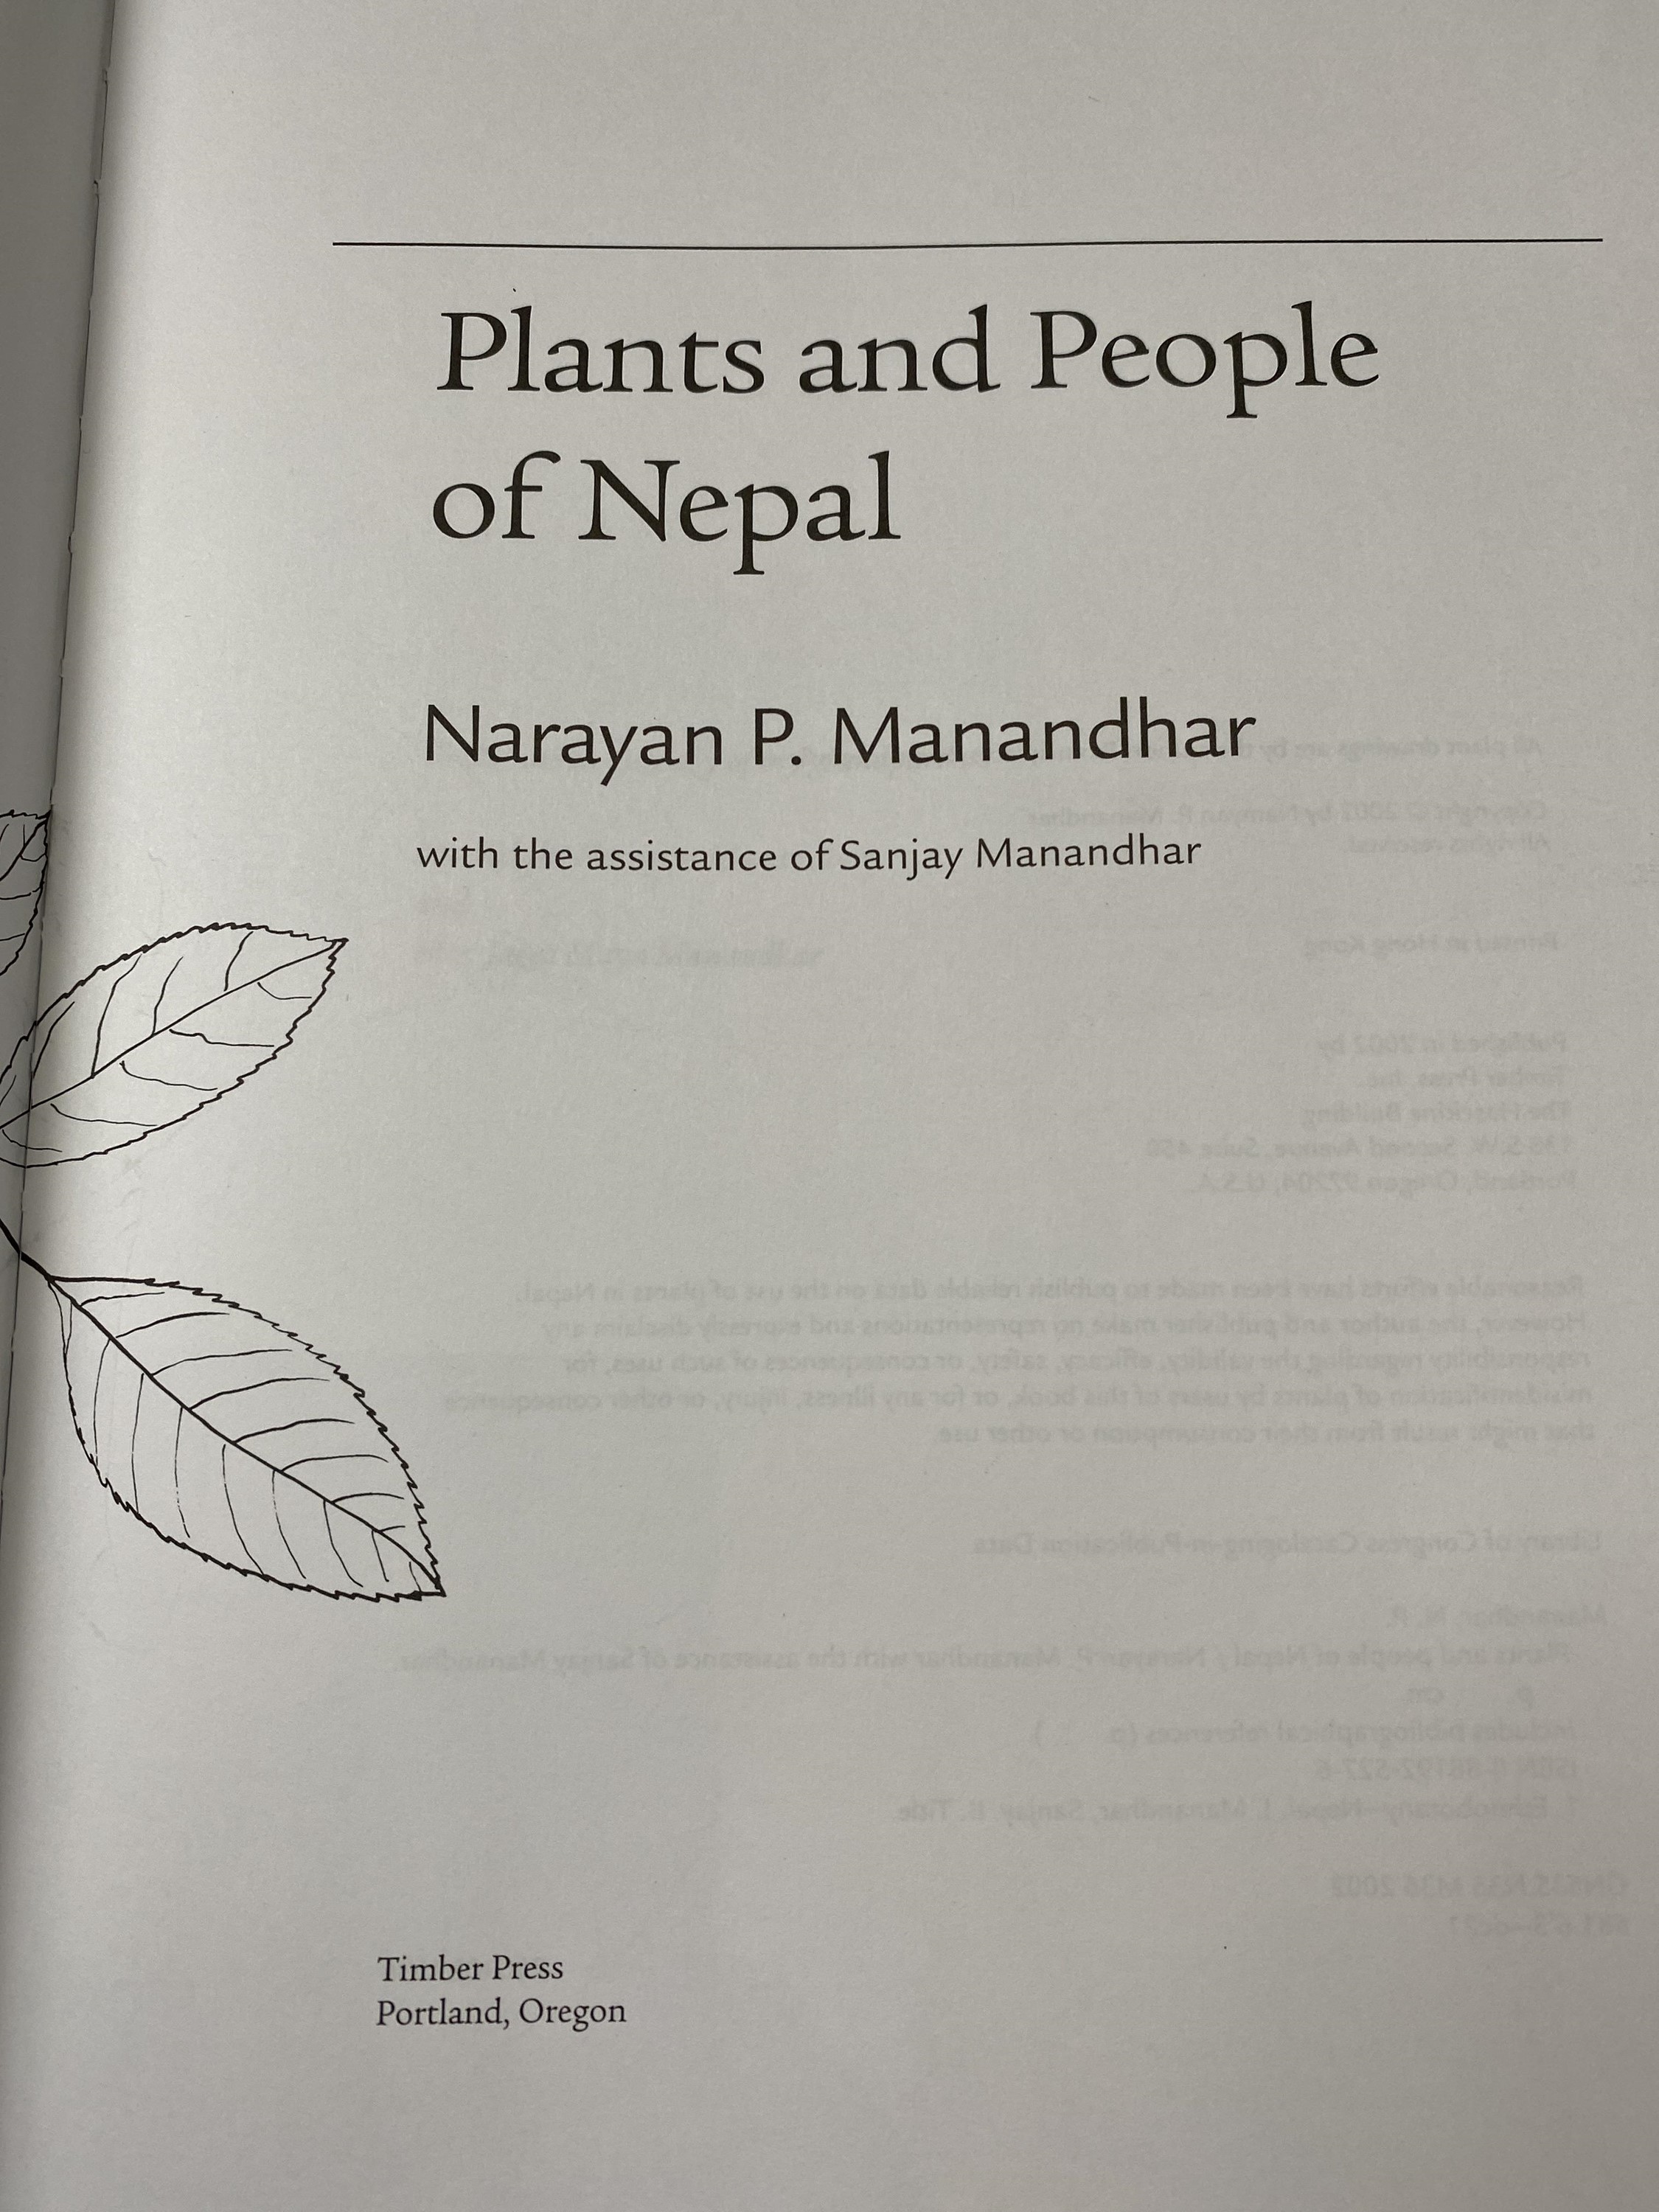 NARAYAN P. MANANDHAR. 'Plants and People of Nepal.' 4to, unclipped dj, original cloth, Timber Press, - Image 2 of 6